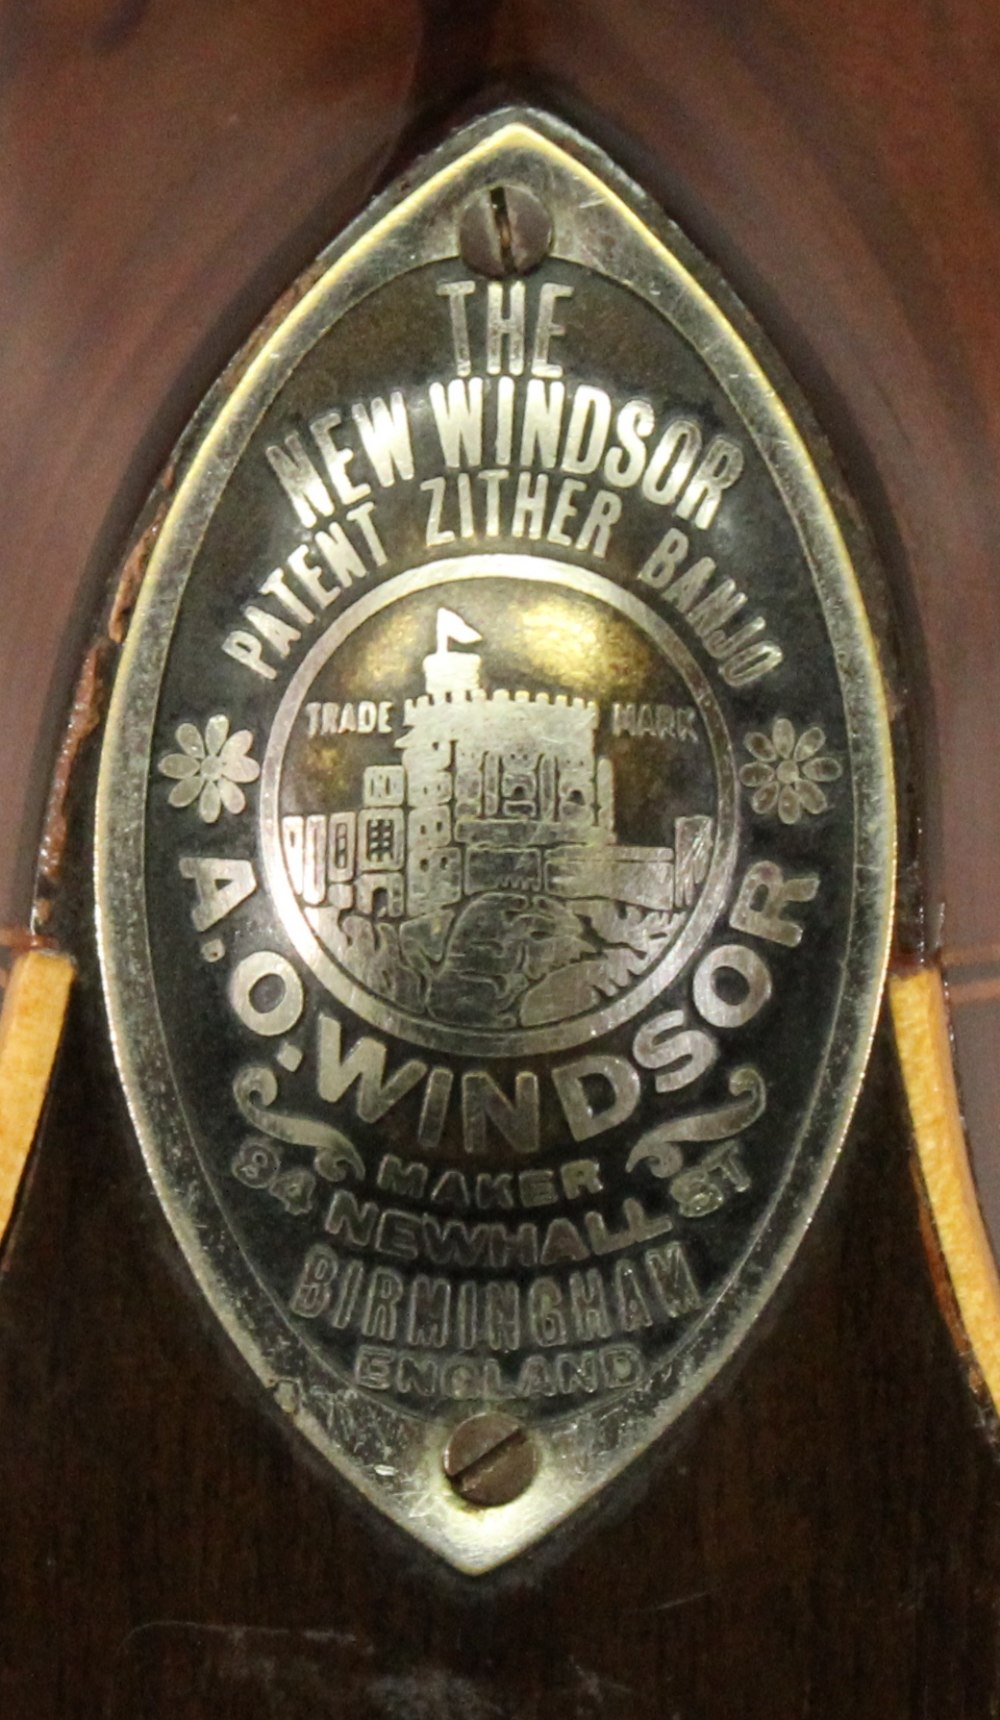 A ROSEWOOD 'THE NEW WINDSOR' PATENT ZITHER BANJO By A O Windsor, 94 Newhall St, Birmingham, of - Image 3 of 3